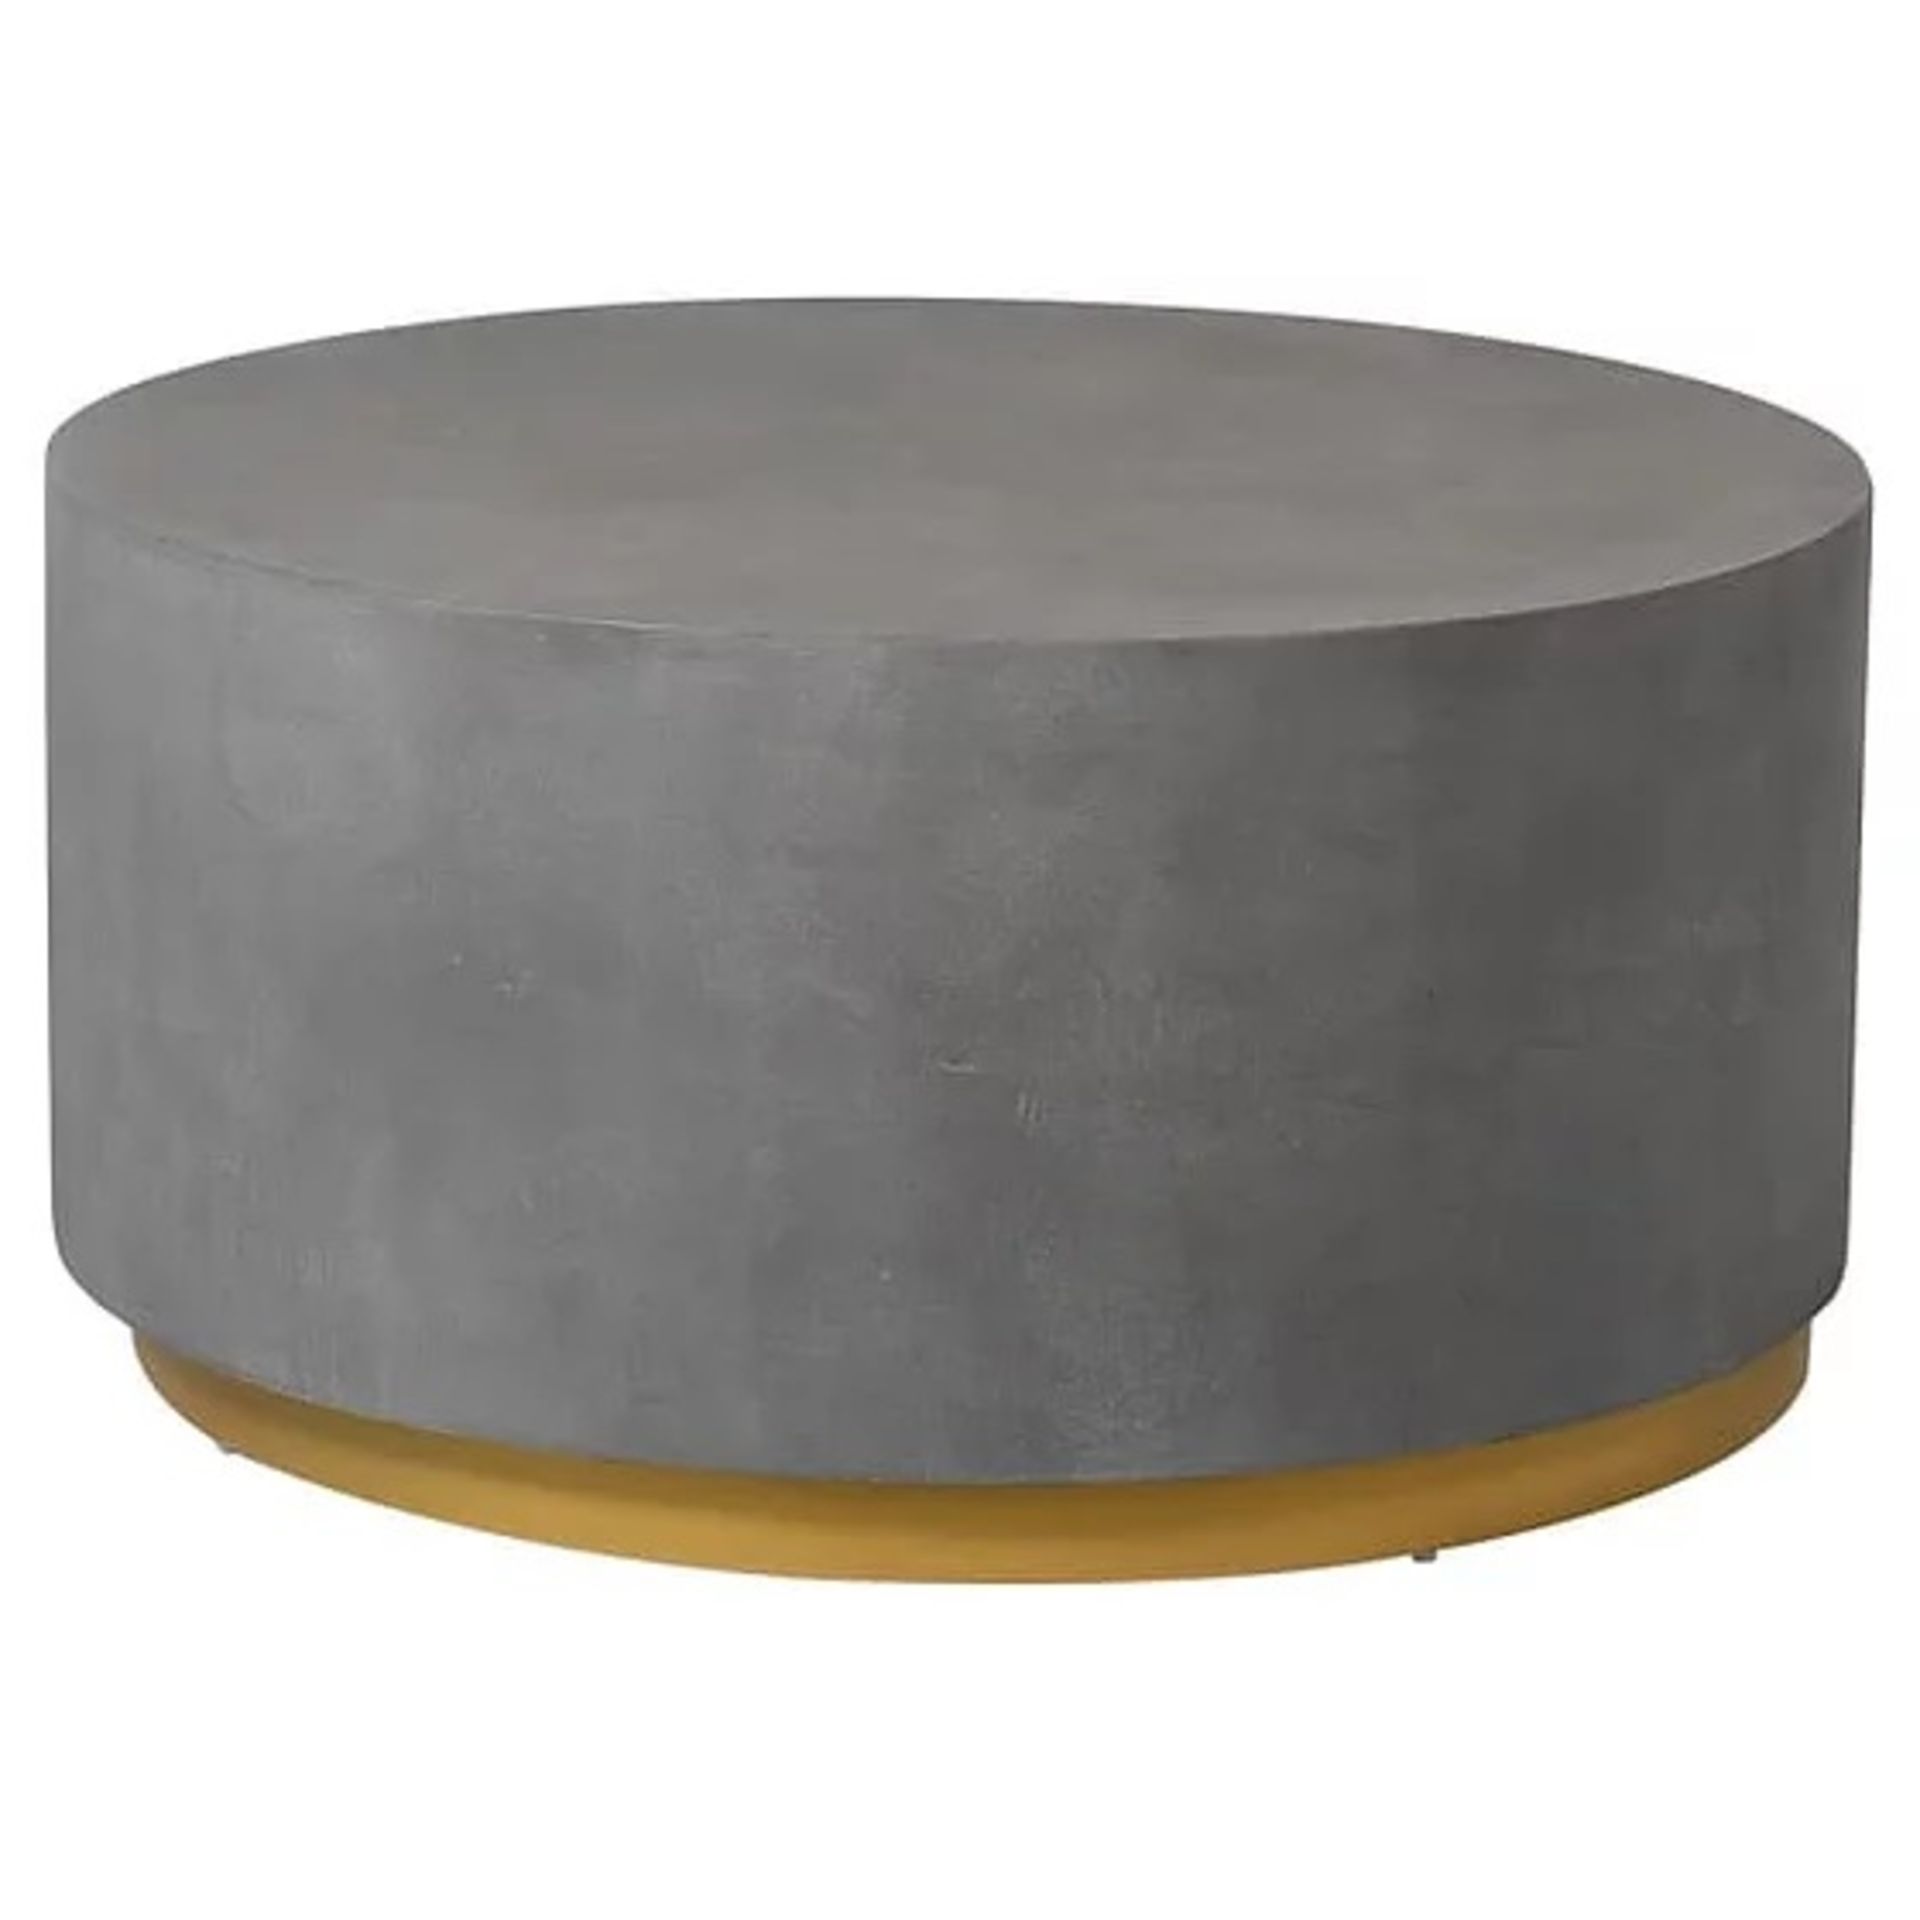 1 x Round Coffee Table With Concrete Effect Finish and Gold Base - RRP £455 - NO VAT ON THE HAMMER!